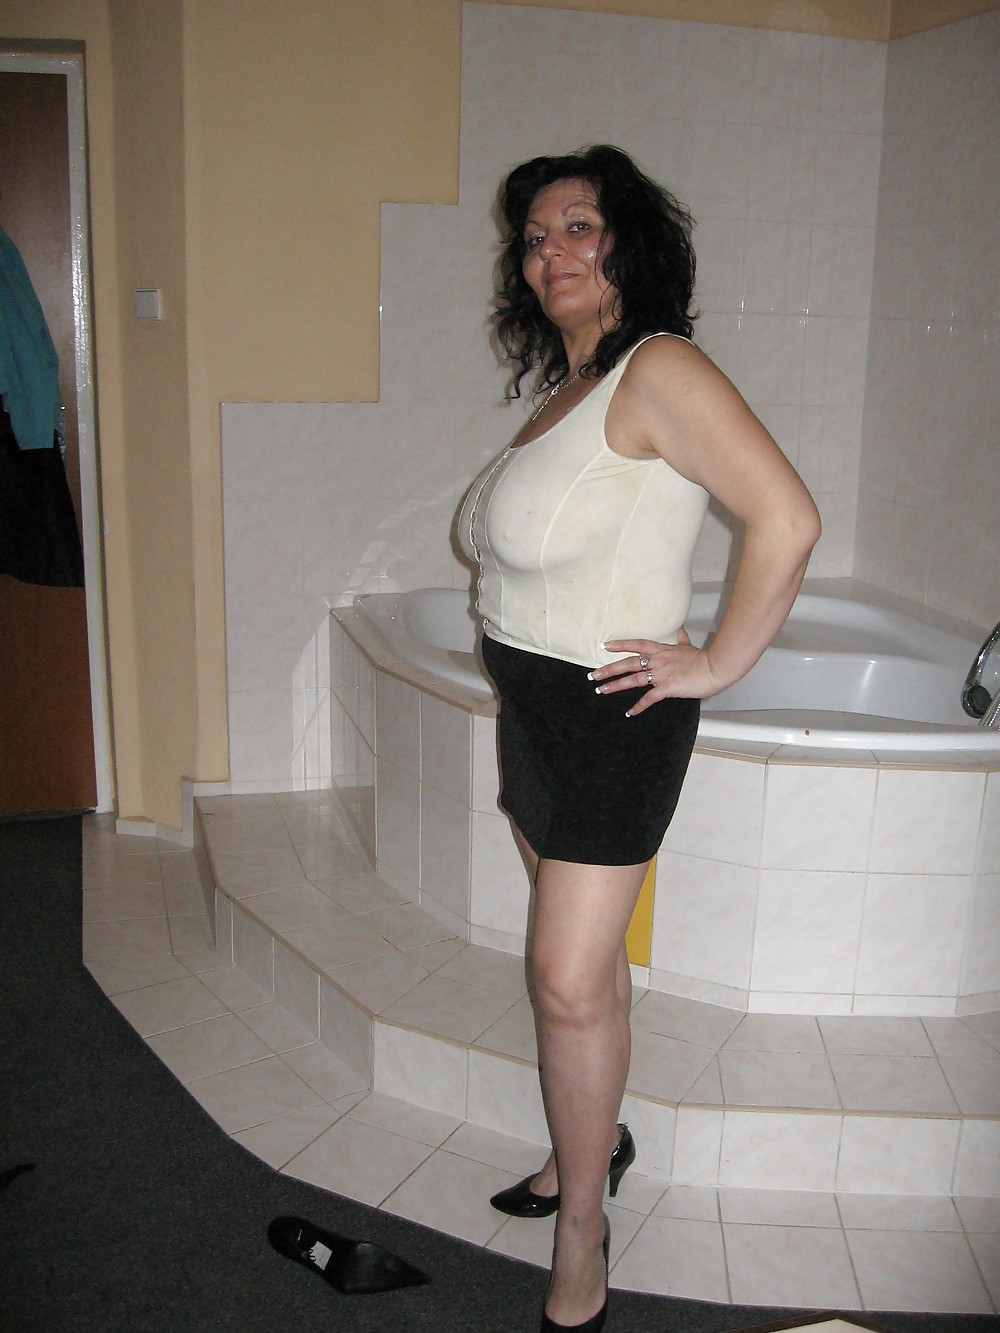 Matures of all shapes and sizes hairy and shaved 70 #22948114